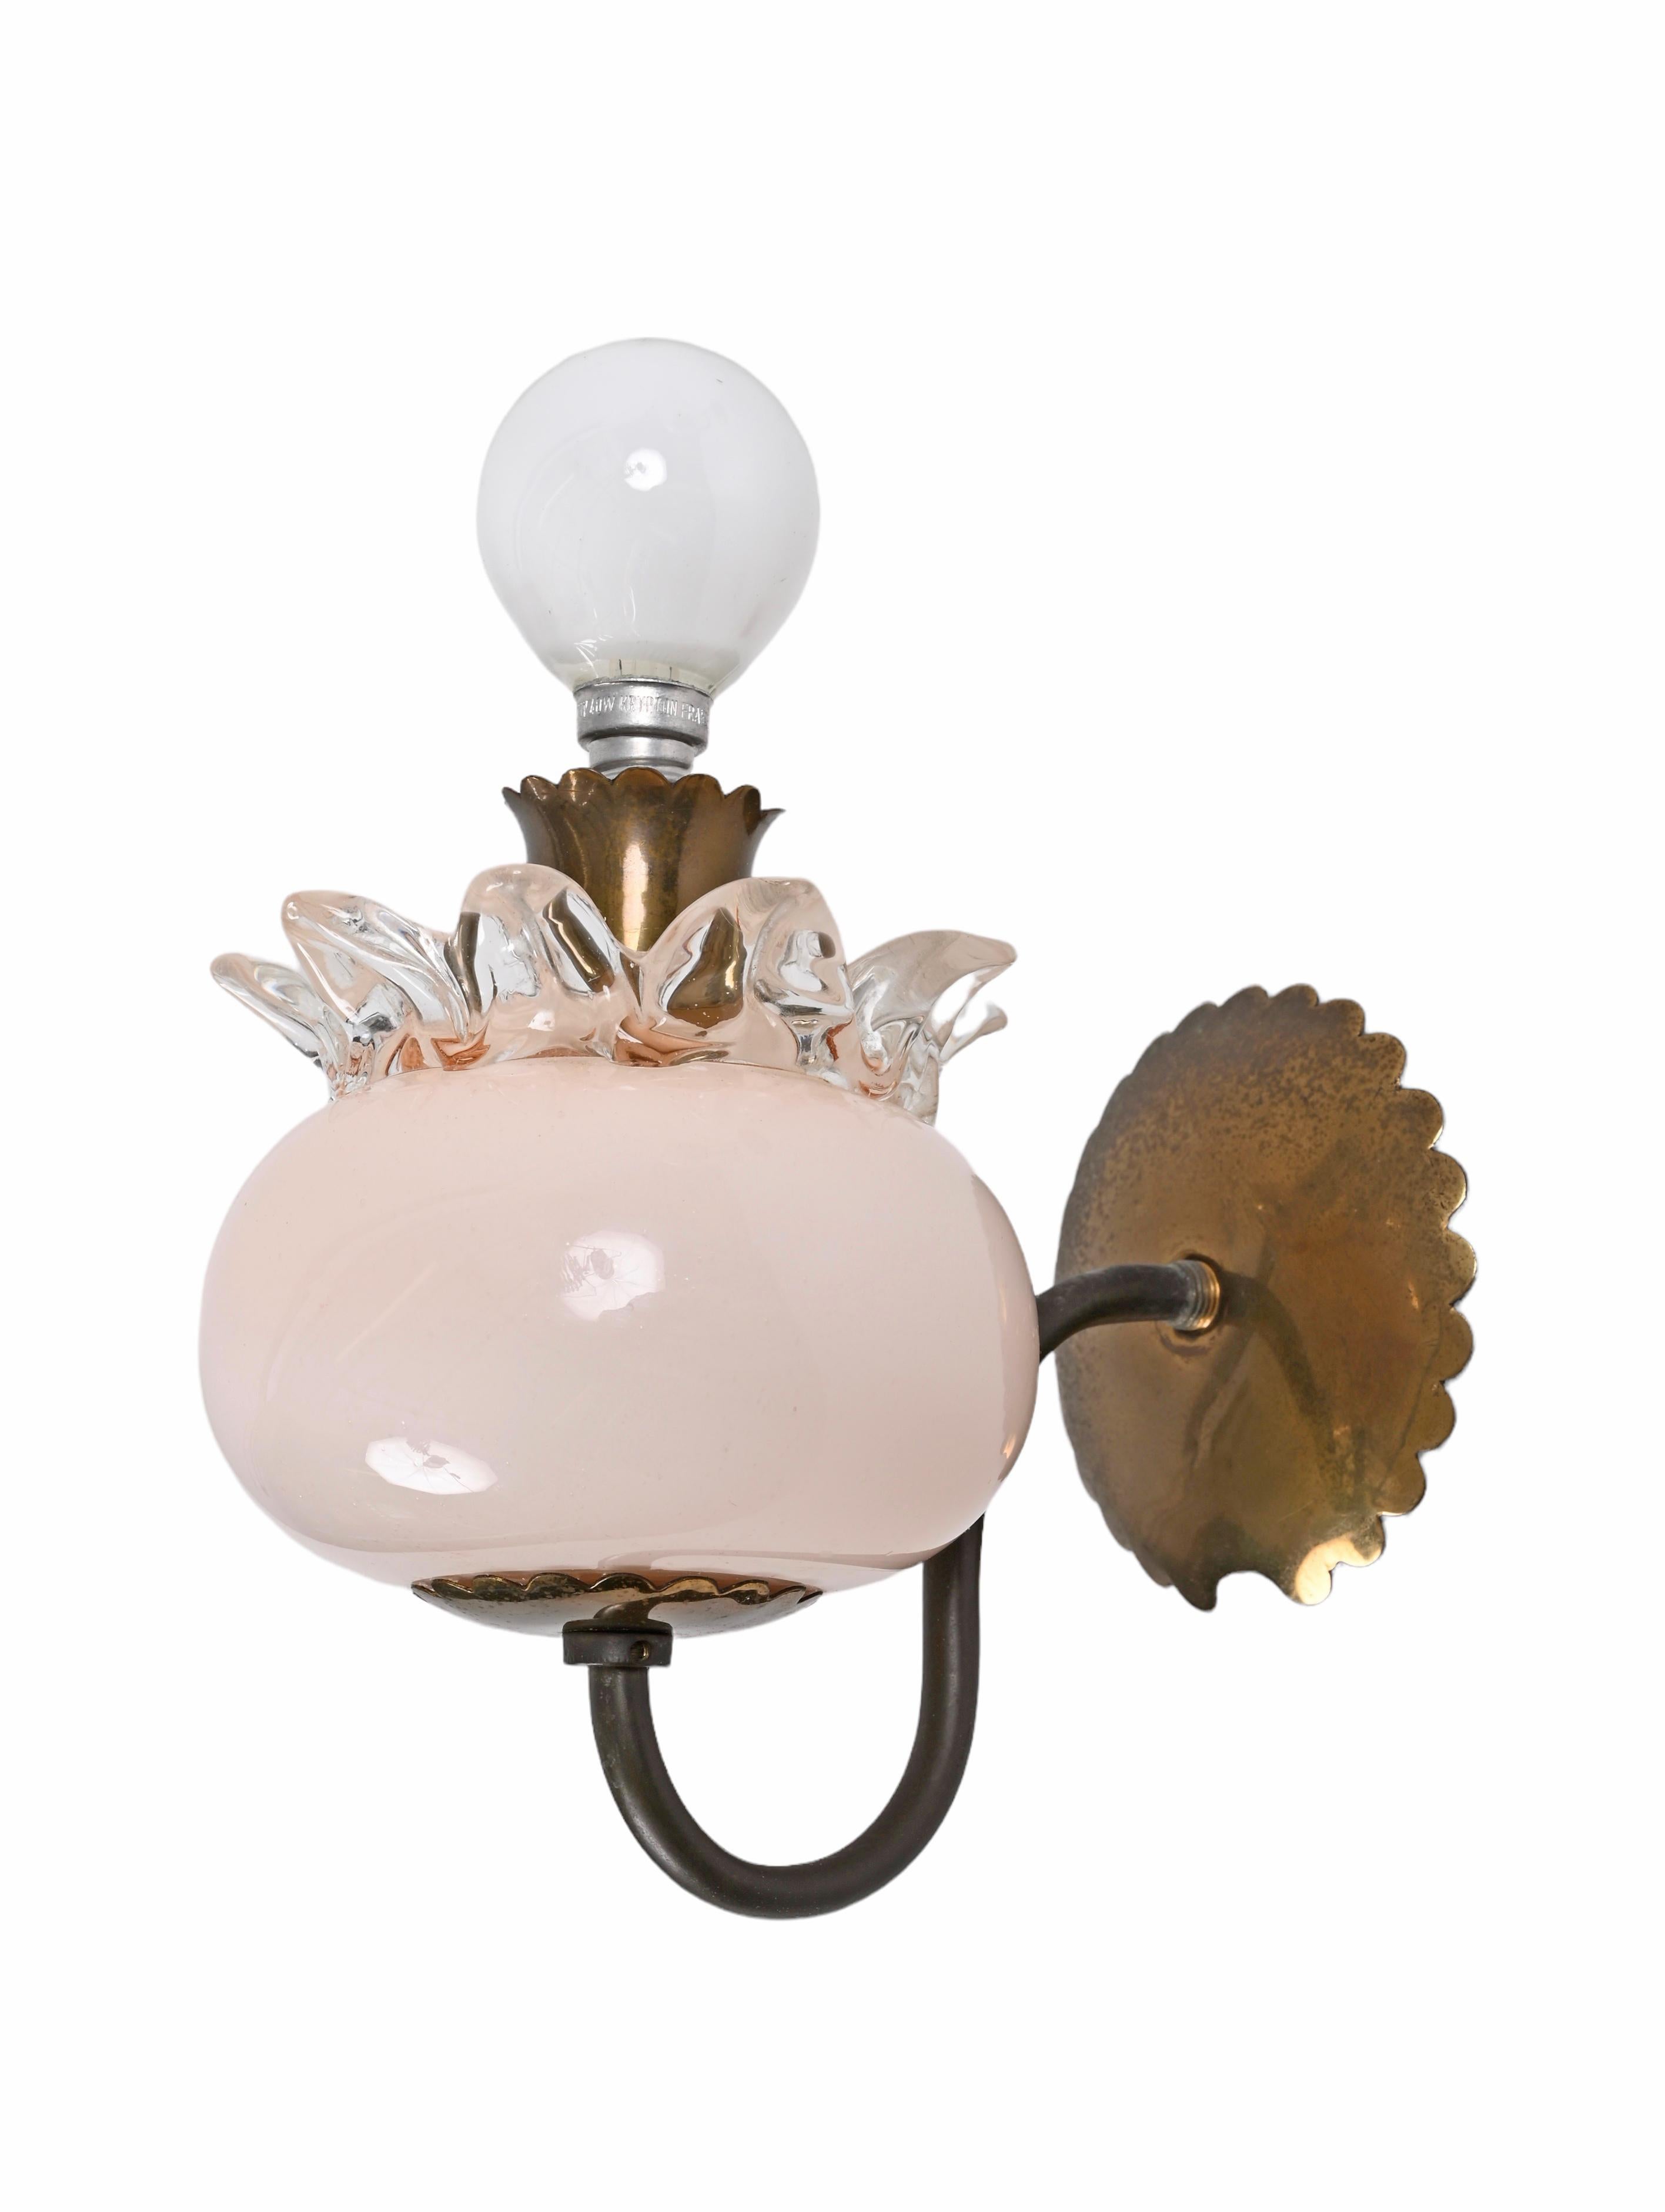 Wonderful pair of Murano pink glass and brass sconces. Archimede Seguso probably designed this fabulous pair of items during the 1940s in Murano, Italy.

This set is amazing as it is made of amazing Murano pink glass with astonishing crystal glass